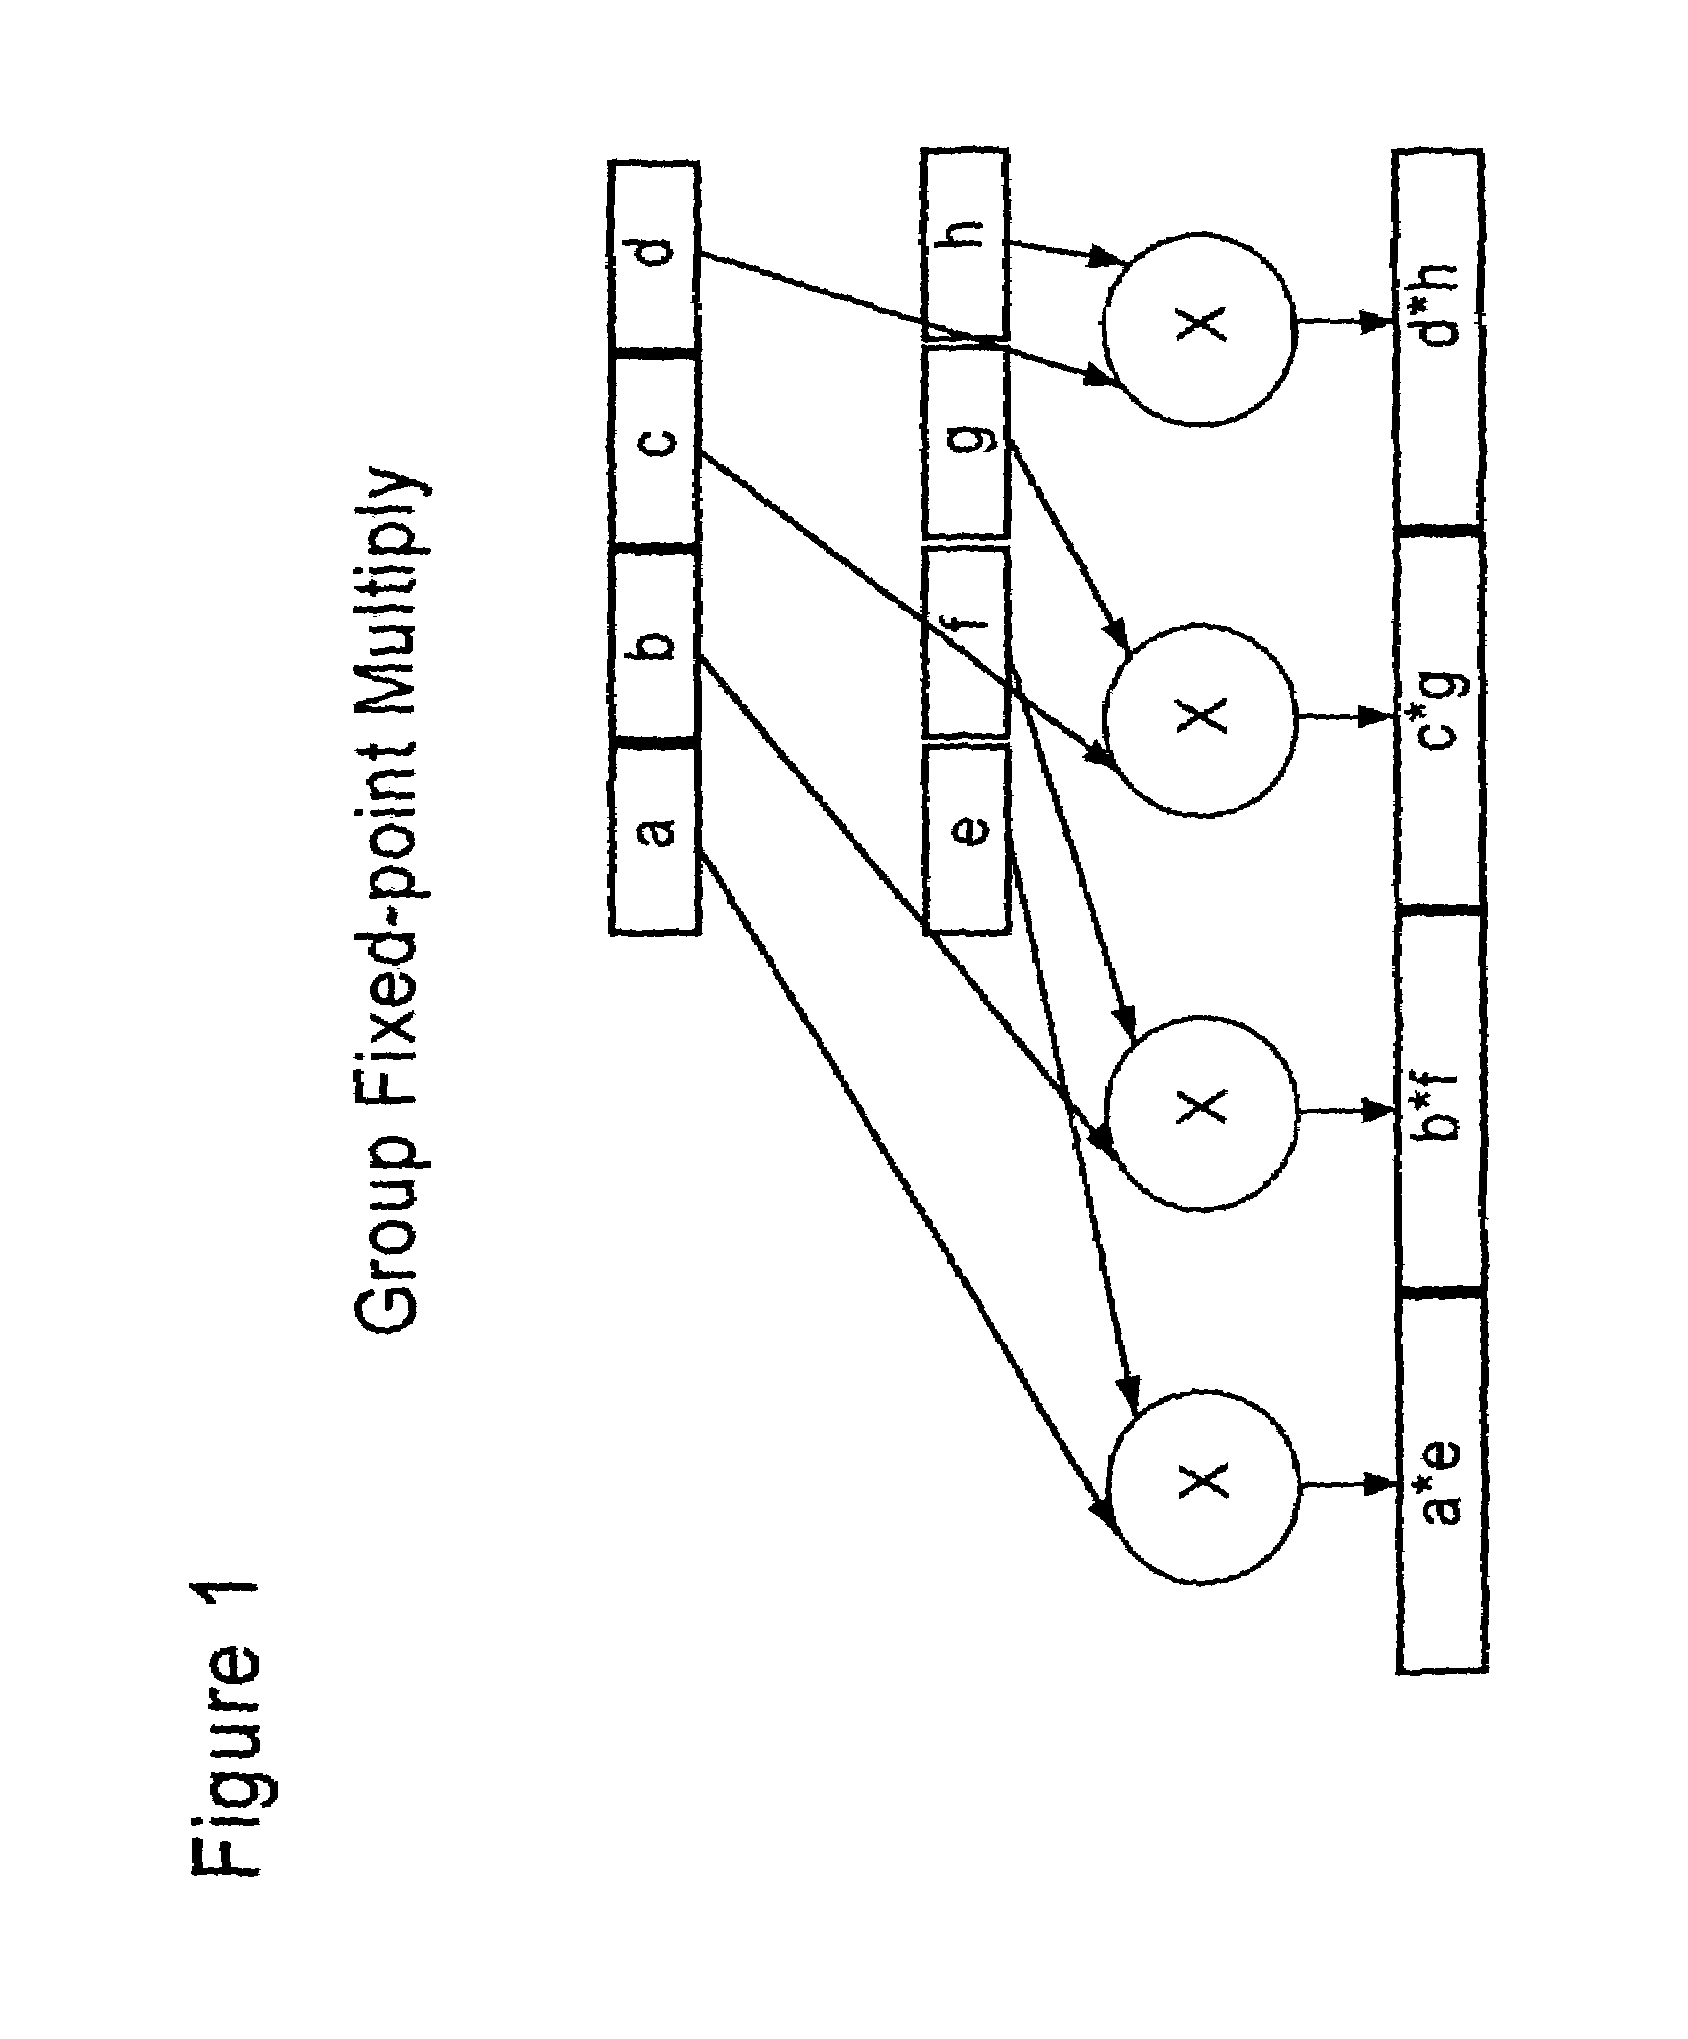 Multiplier array processing system with enhanced utilization at lower precision